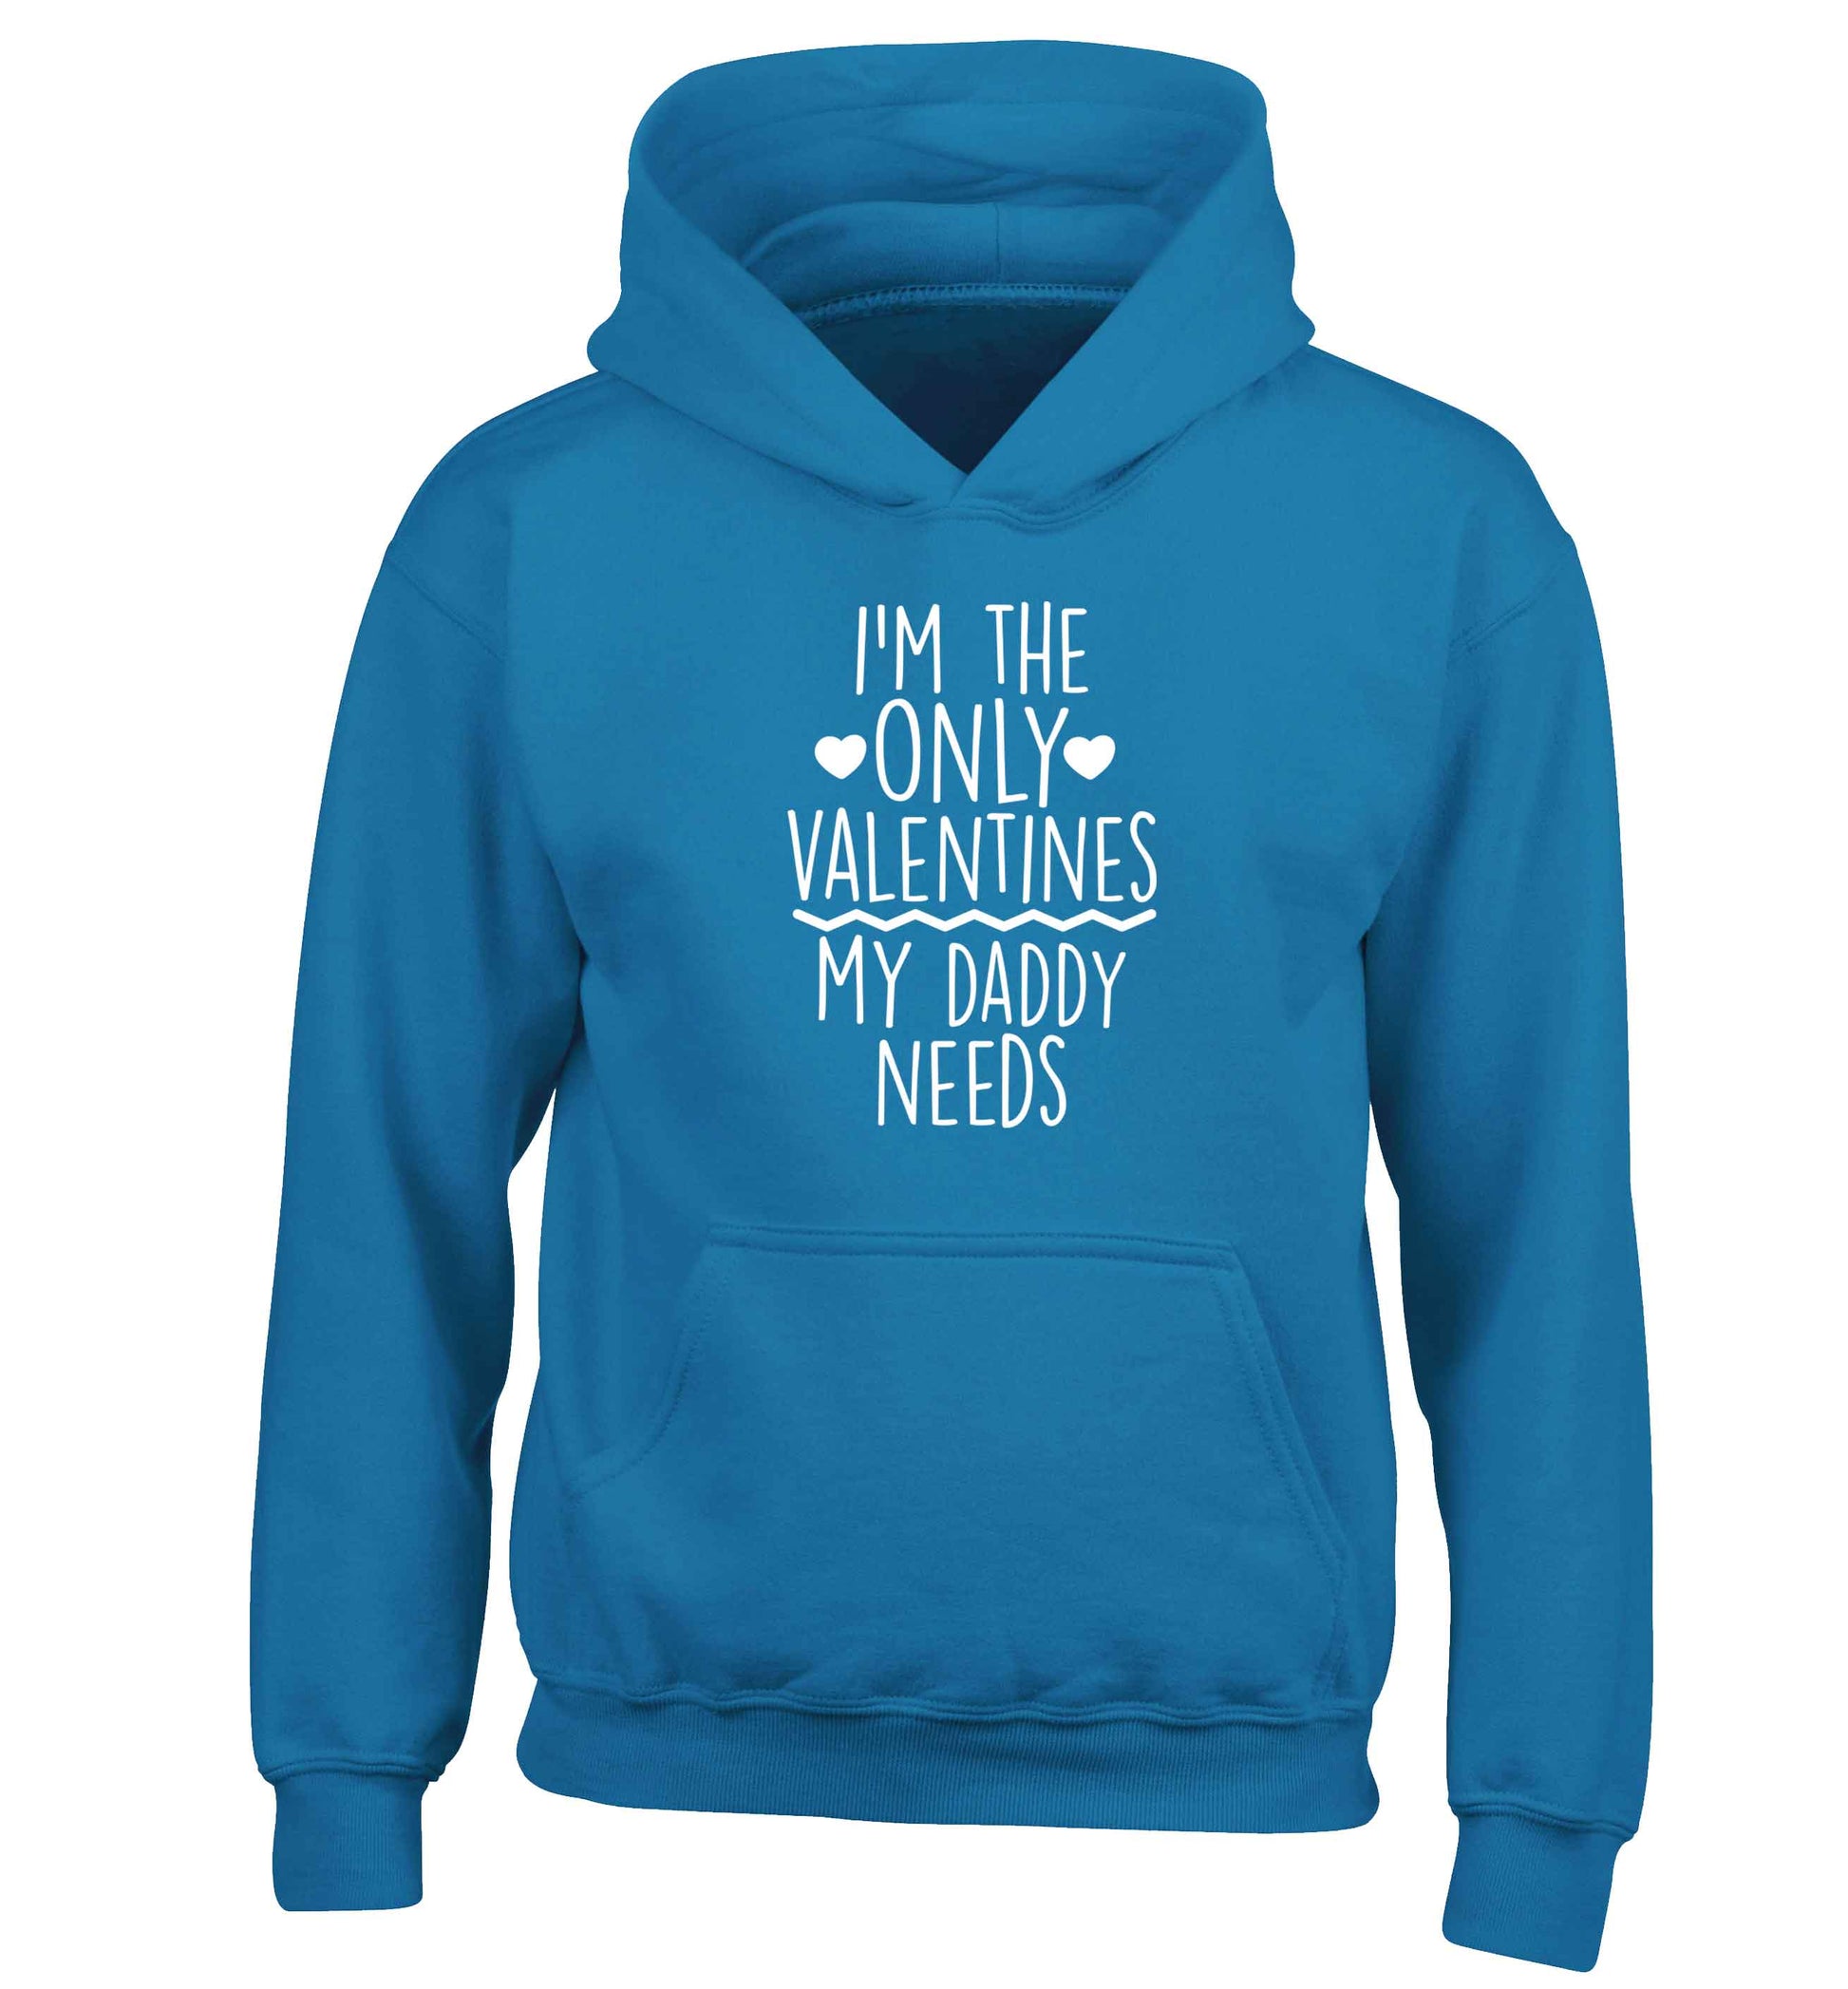 I'm the only valentines my daddy needs children's blue hoodie 12-13 Years